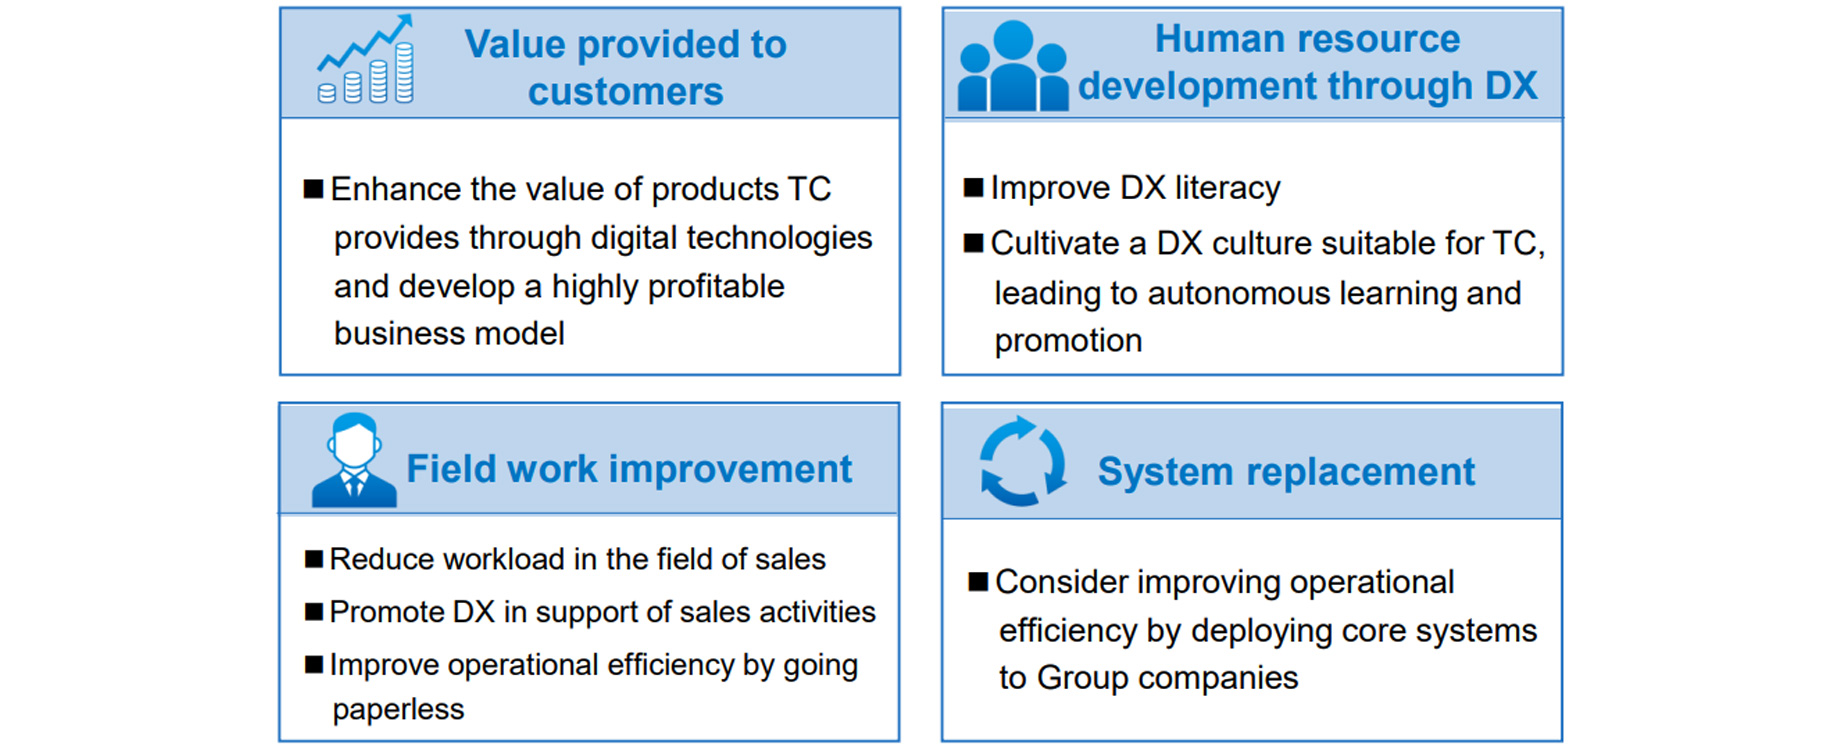 Four Key Themes of the DX Task Force